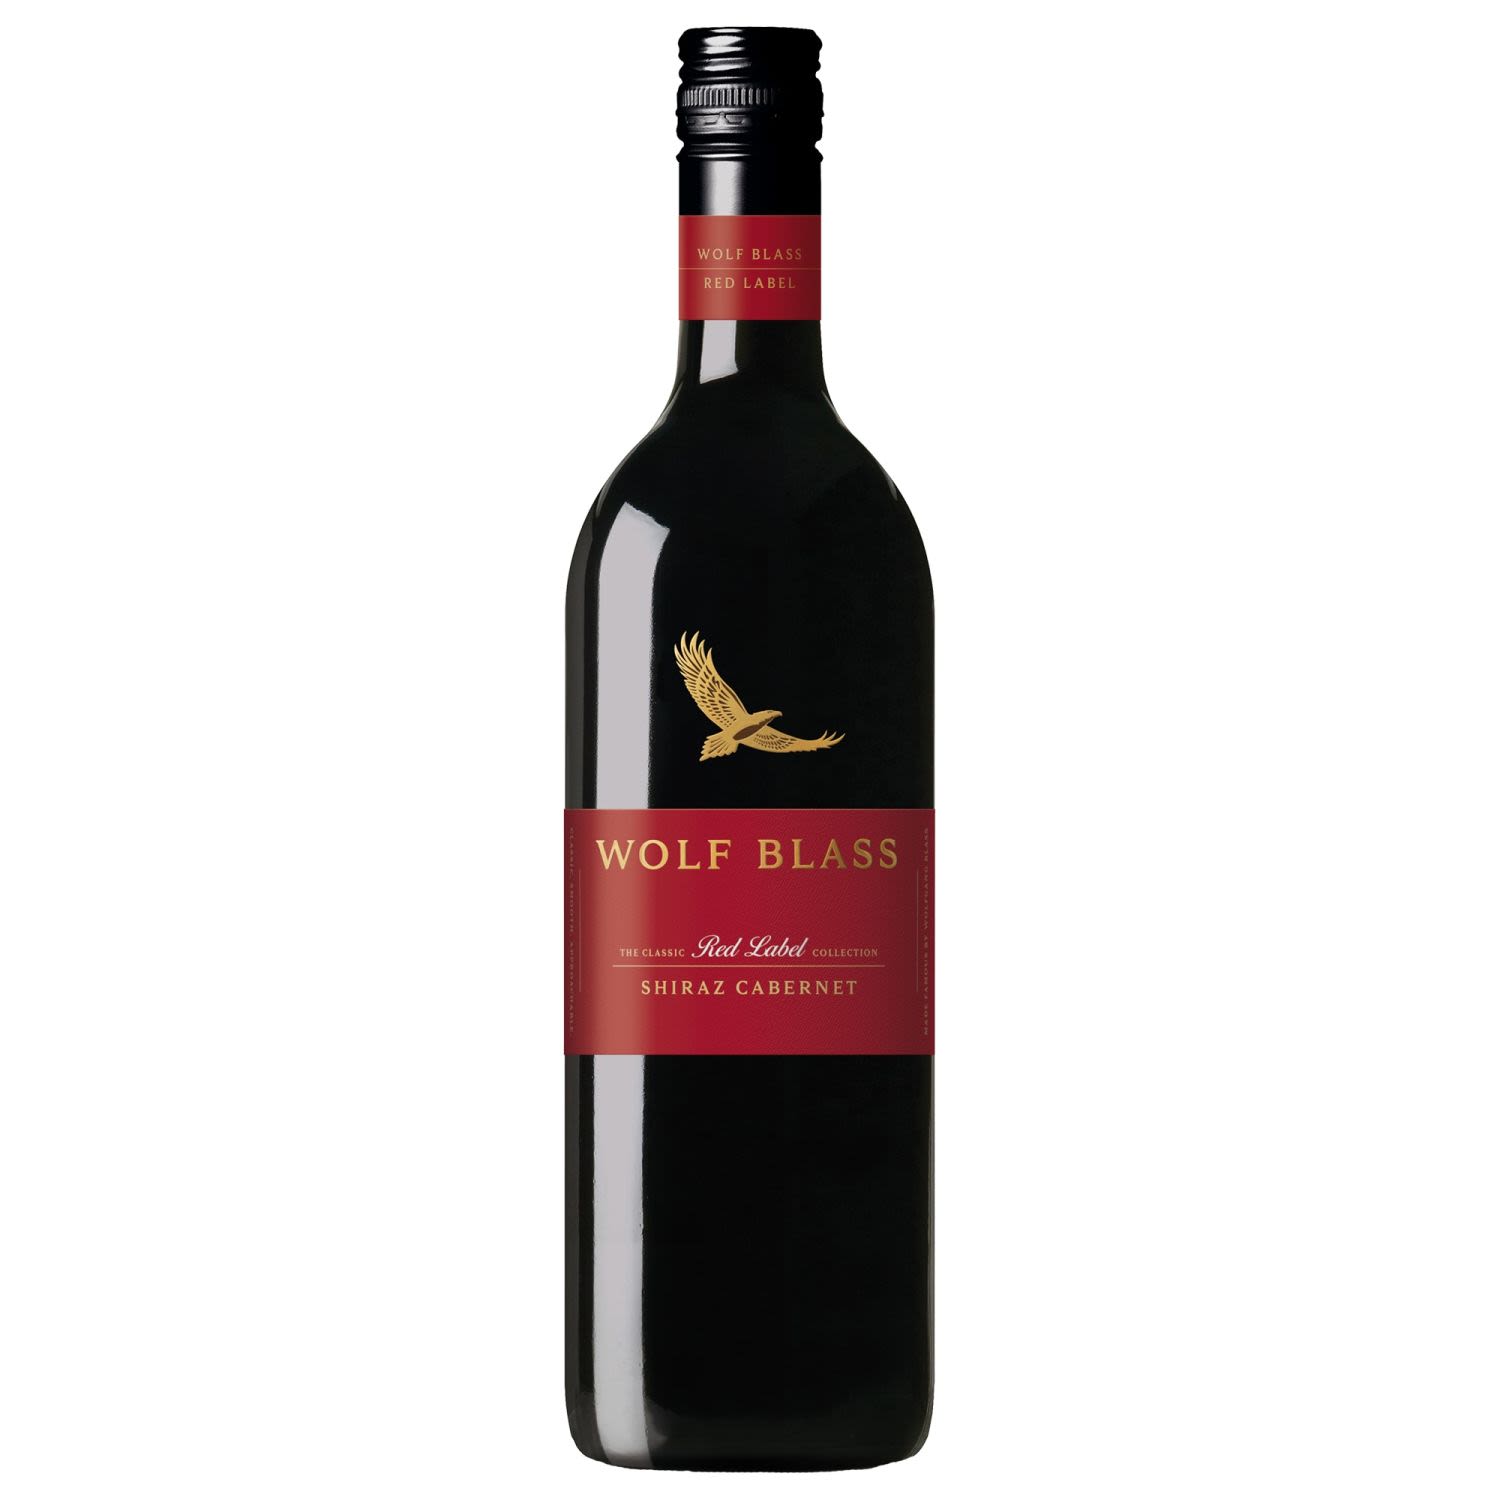 The nose shows fresh aromas of plums & berries with hints of spice & earth. This is a medium to full bodied wine that offers a sweet middle palate, finishing with a fine, smooth finish.<br /> <br />Alcohol Volume: 13.50%<br /><br />Pack Format: Bottle<br /><br />Standard Drinks: 8</br /><br />Pack Type: Bottle<br /><br />Country of Origin: Australia<br /><br />Region: South Eastern Australia<br /><br />Vintage: '2018<br />